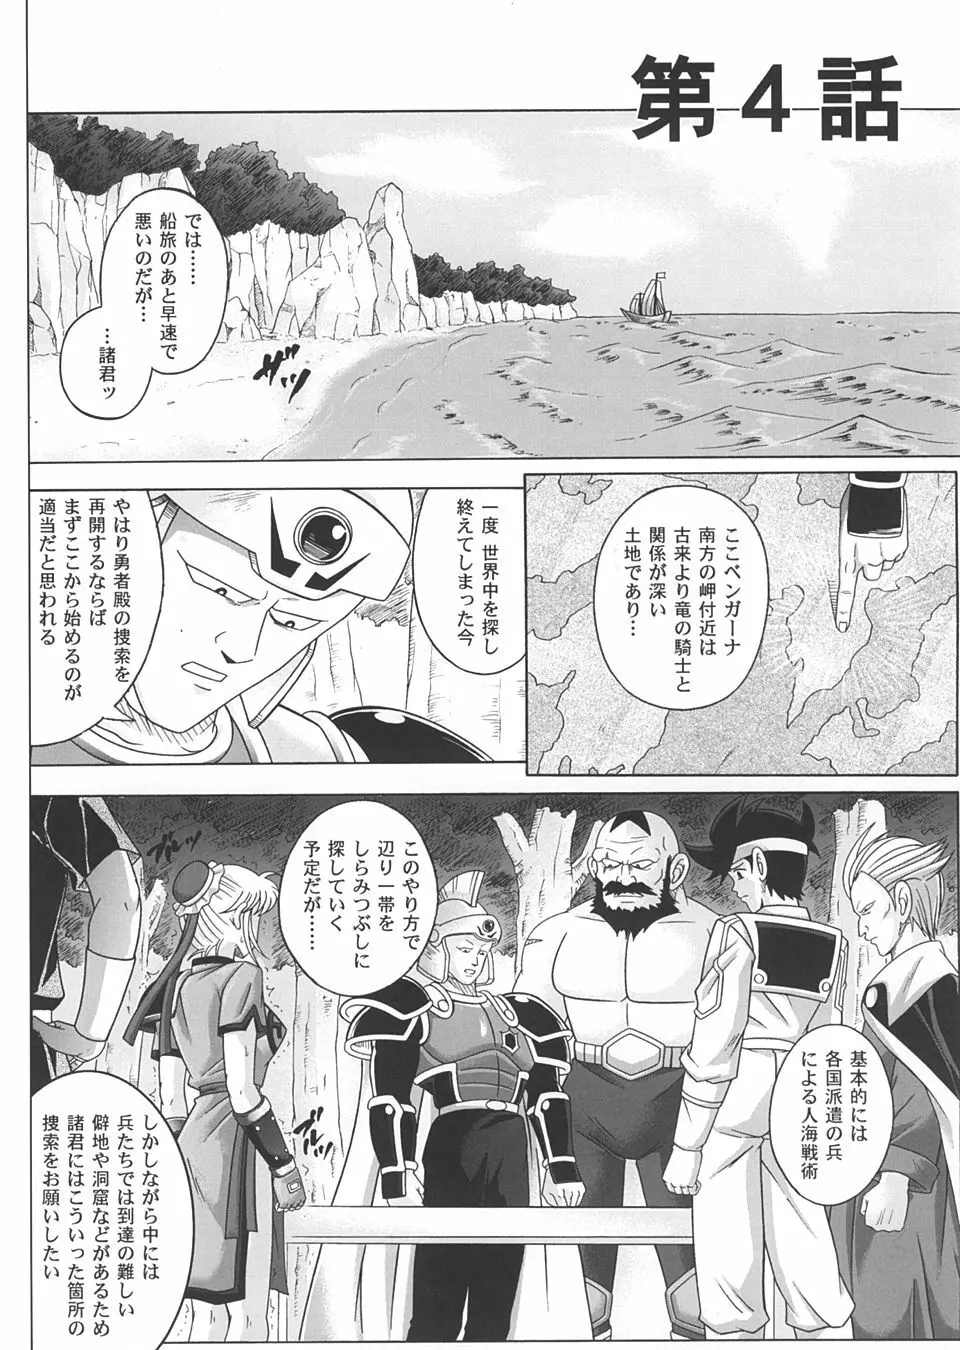 Sinclair 2 & Extra -シンクレア2- Page.25